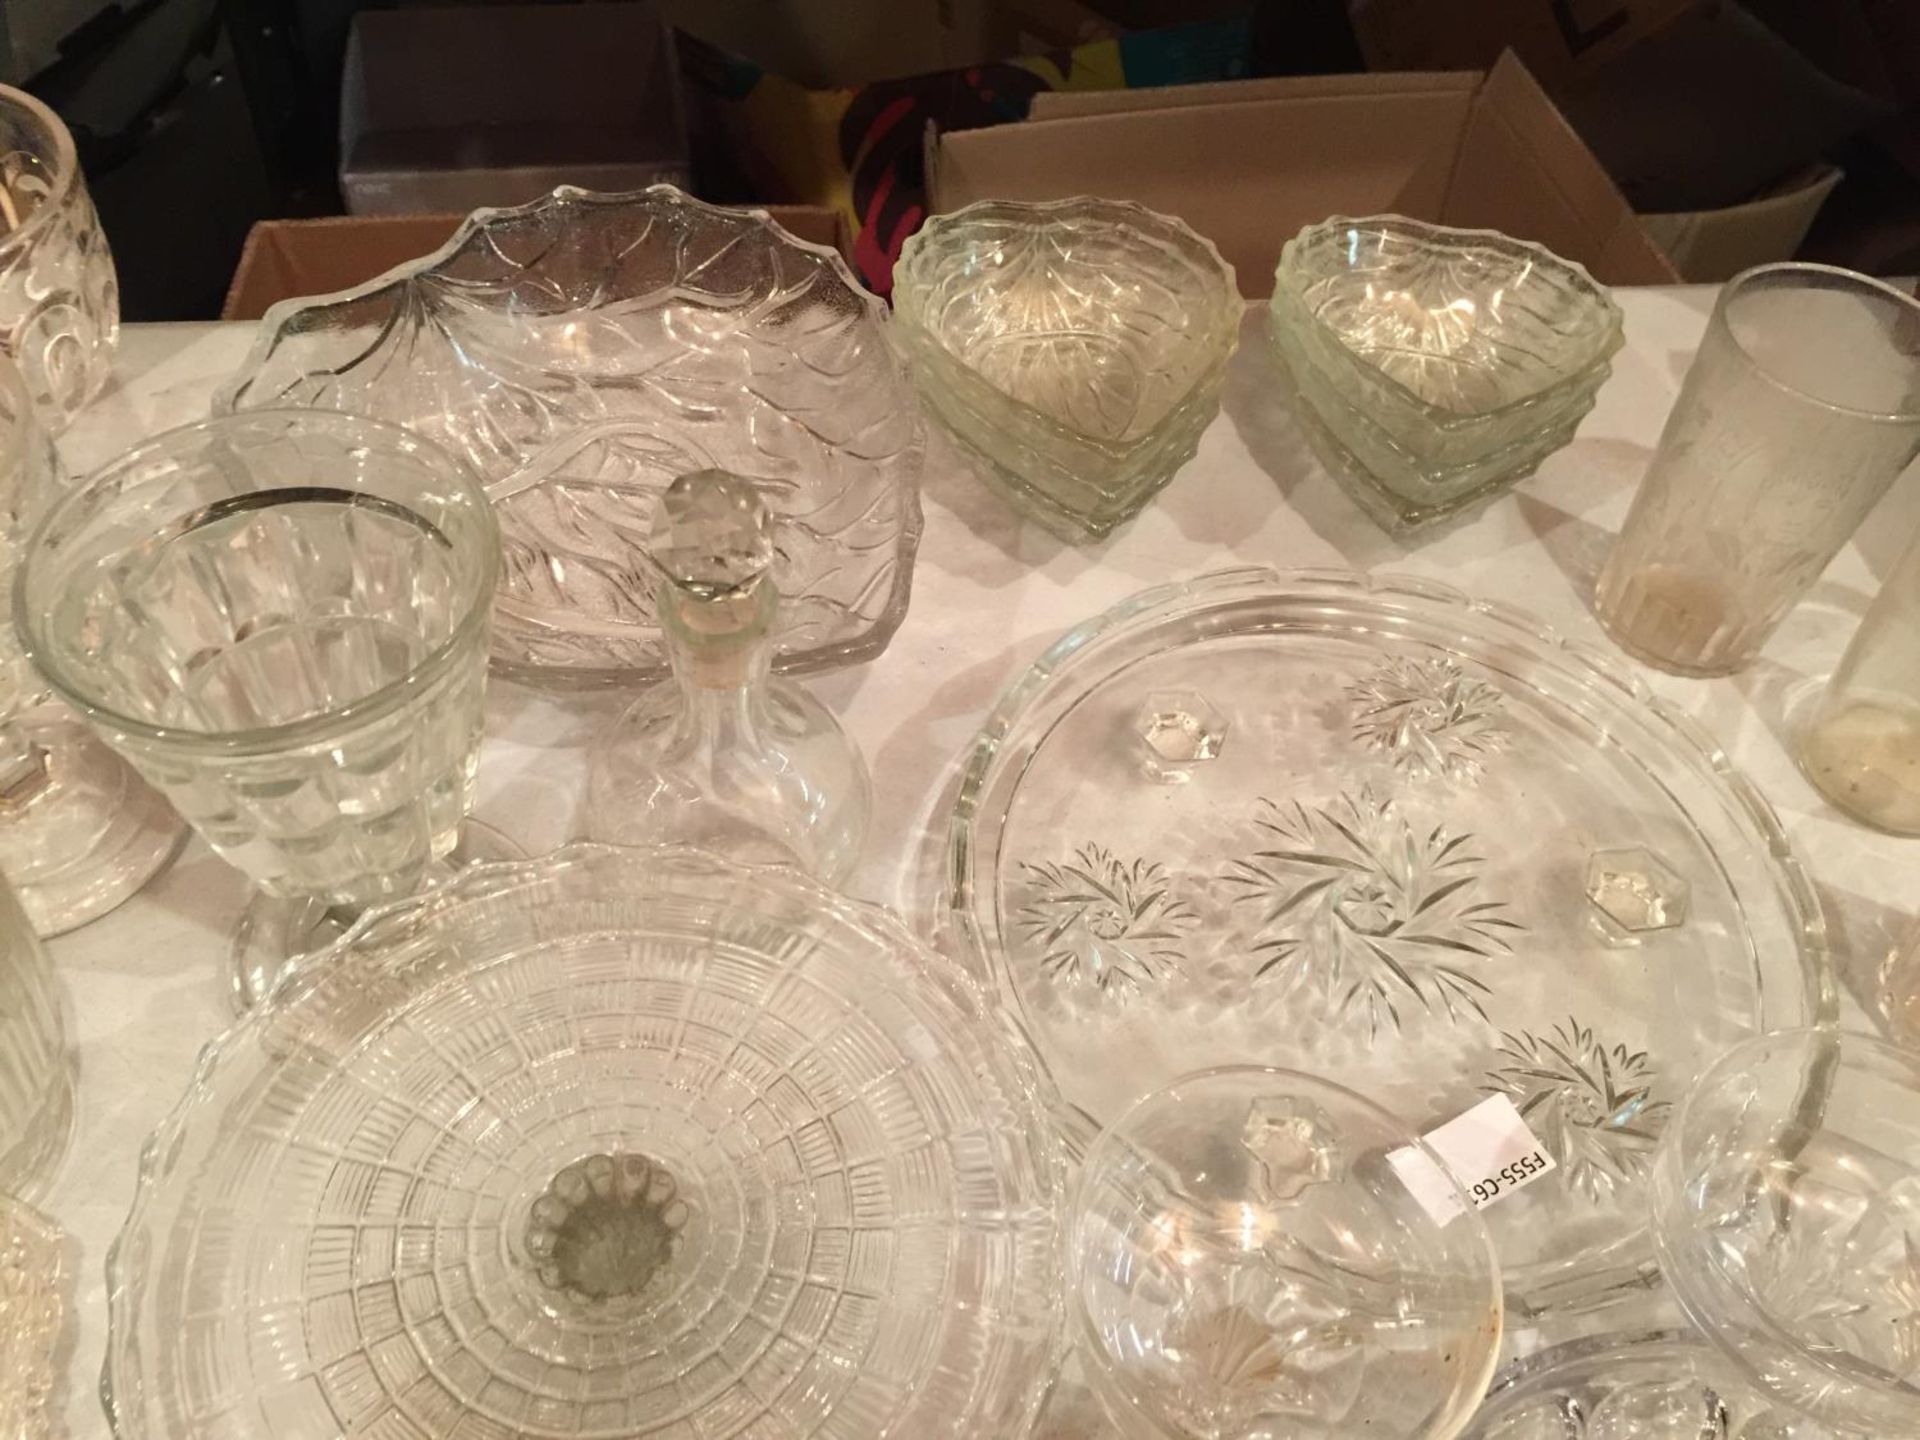 A LARGE AMOUNT OF CLEAR GLASSWARE TO INCLUDE HEART SHAPED DISHES, COMMEMORATIVE TUMBLERS, CAKE - Image 4 of 4